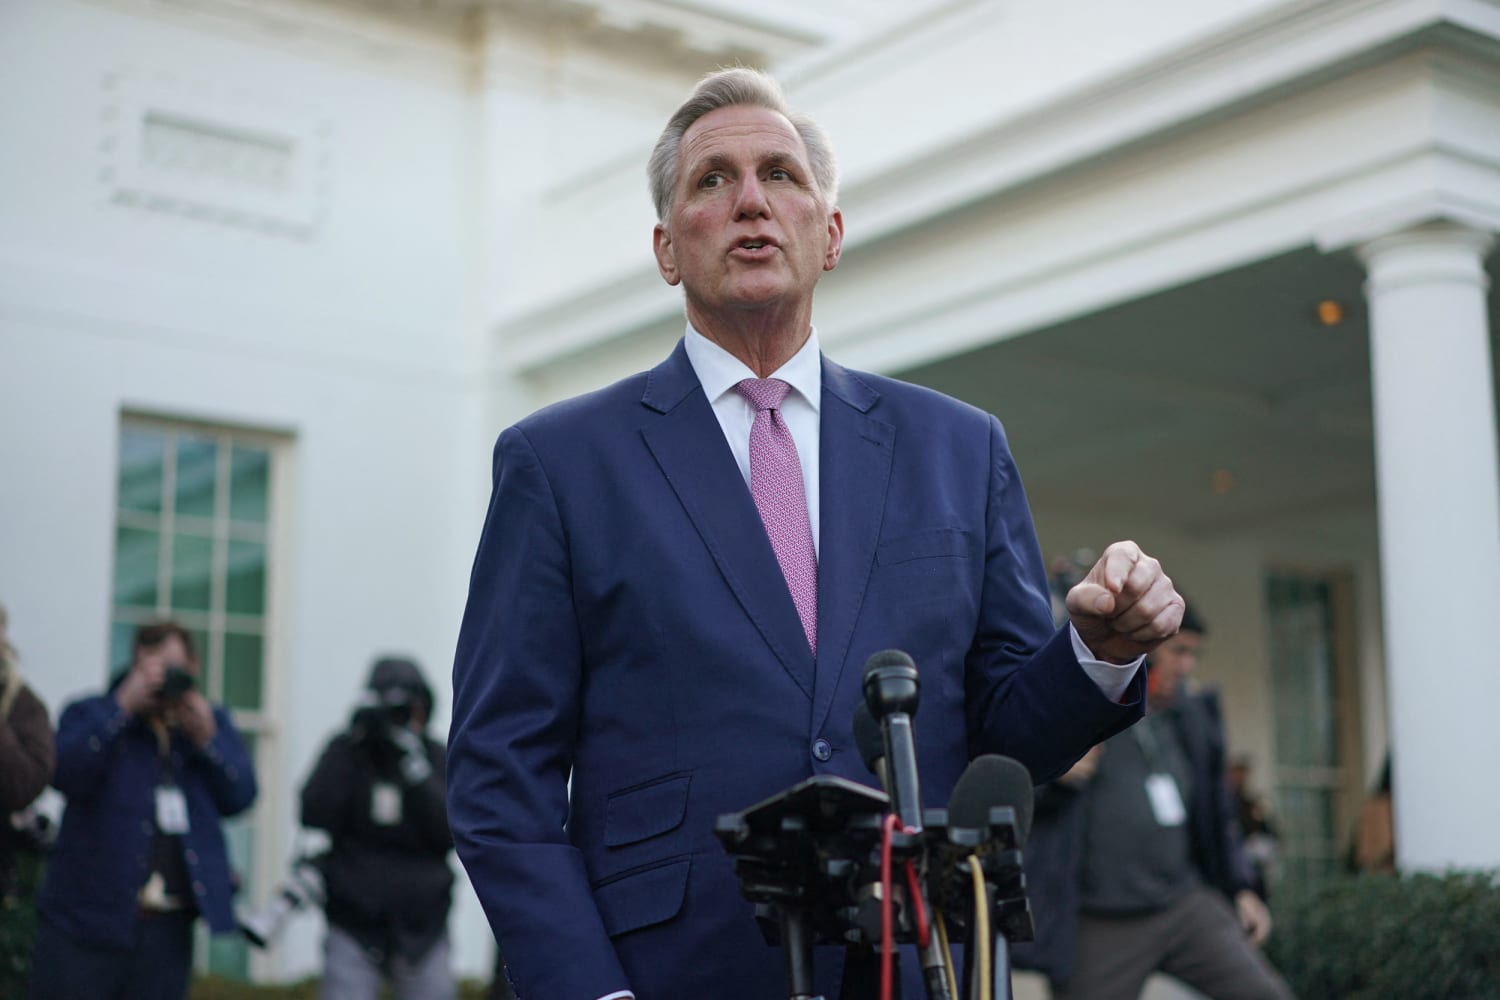 McCarthy describes 'good' first meeting with Biden, but 'no agreements' on debt ceiling